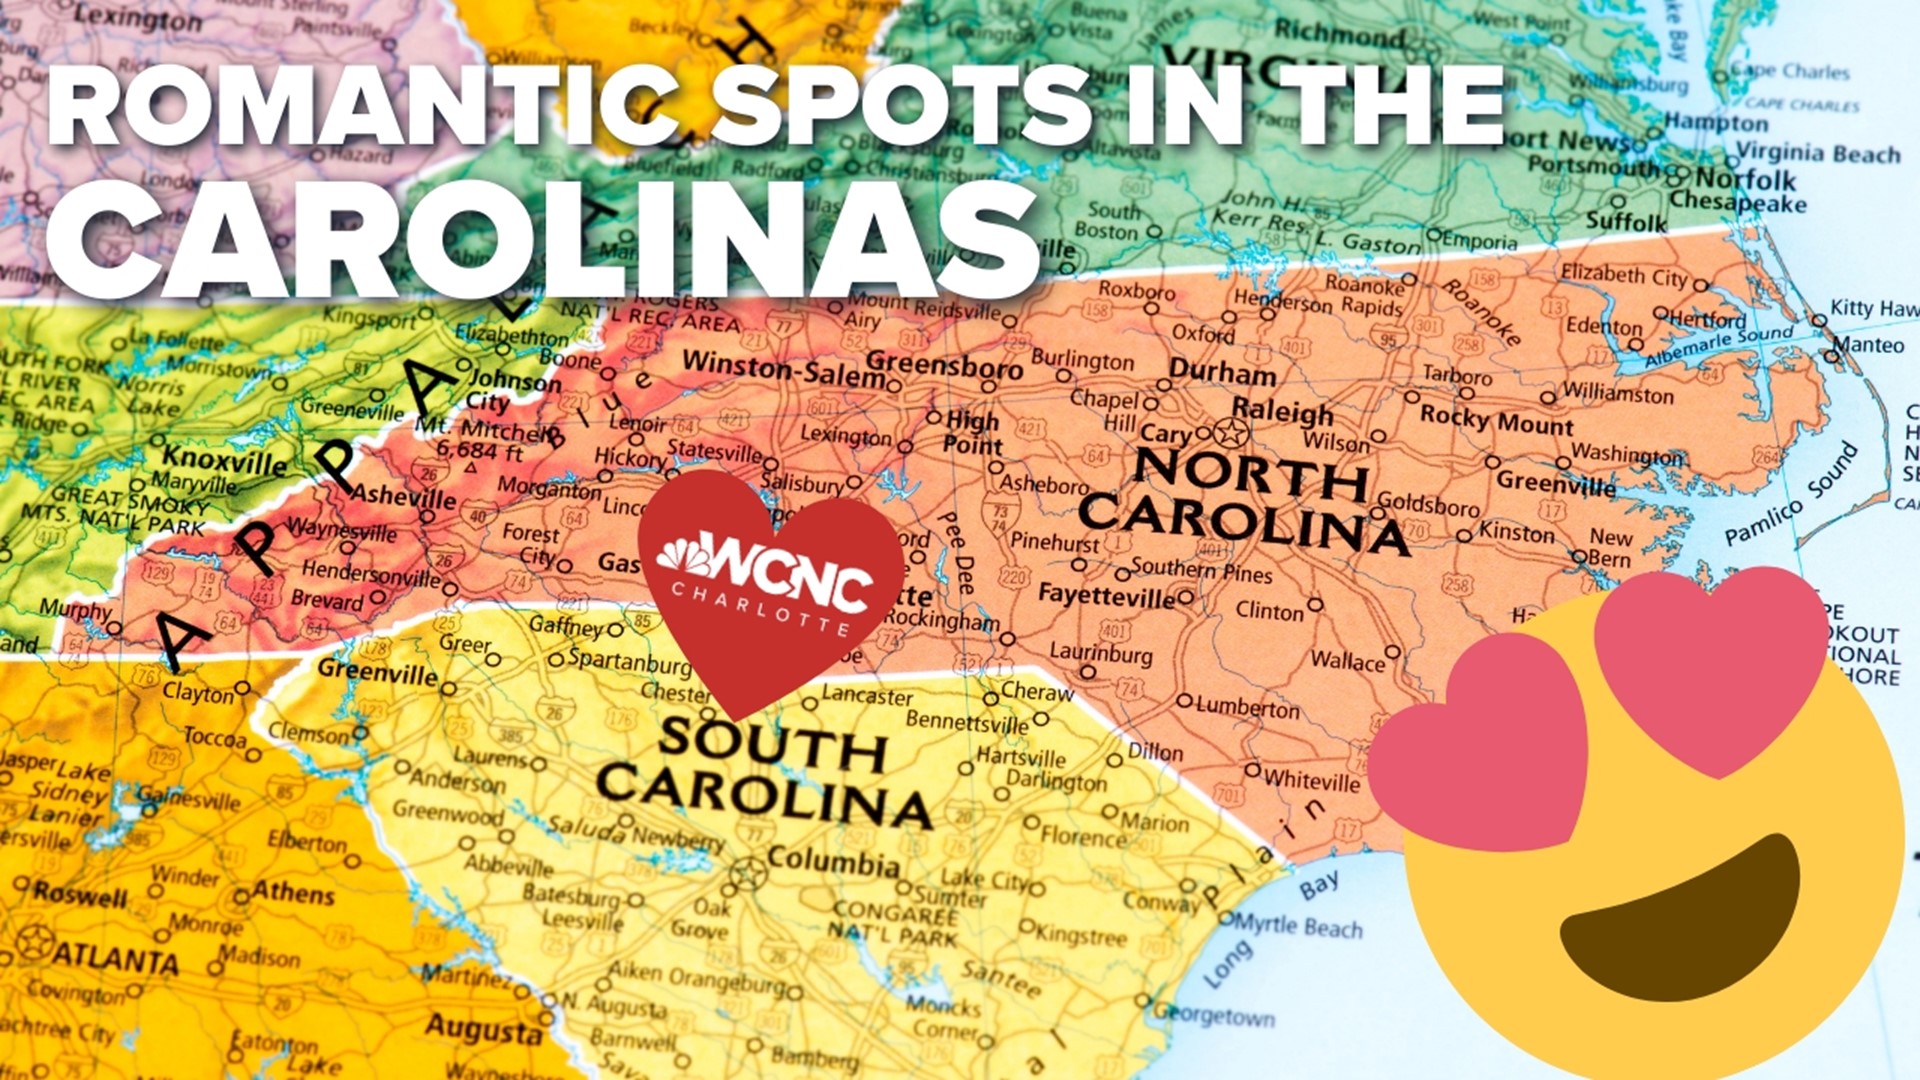 Travel and Leisure magazine lists the most romantic spots in every state. Here are the best spots in the Carolinas!